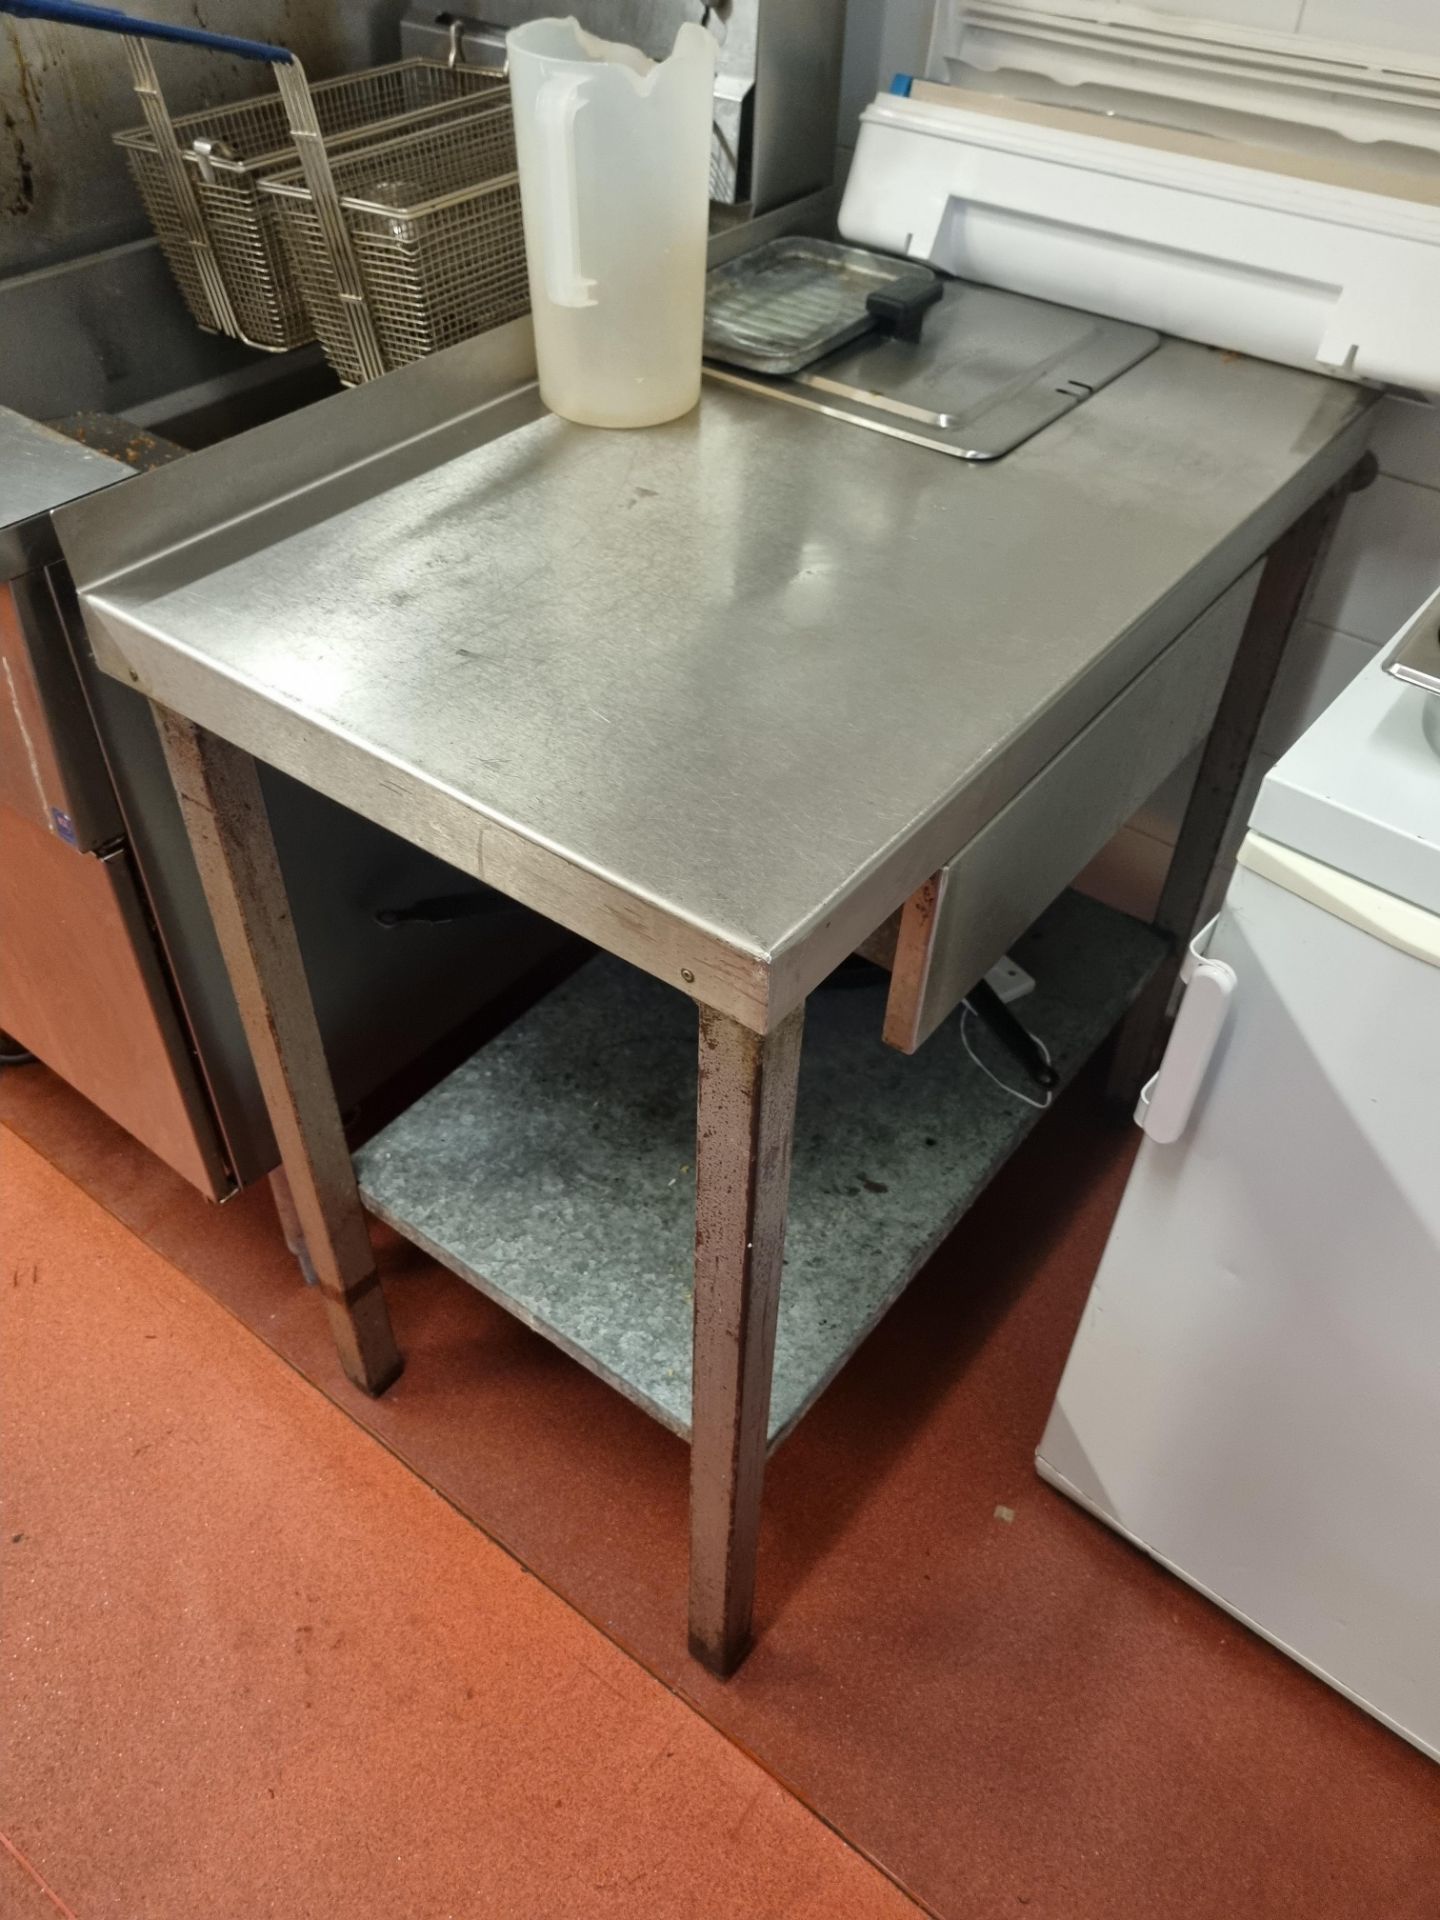 Stainless Steel Topped Table With Drawer, Backsplash and Undershelf W 820mmD 500mm H 860mm - Image 2 of 2